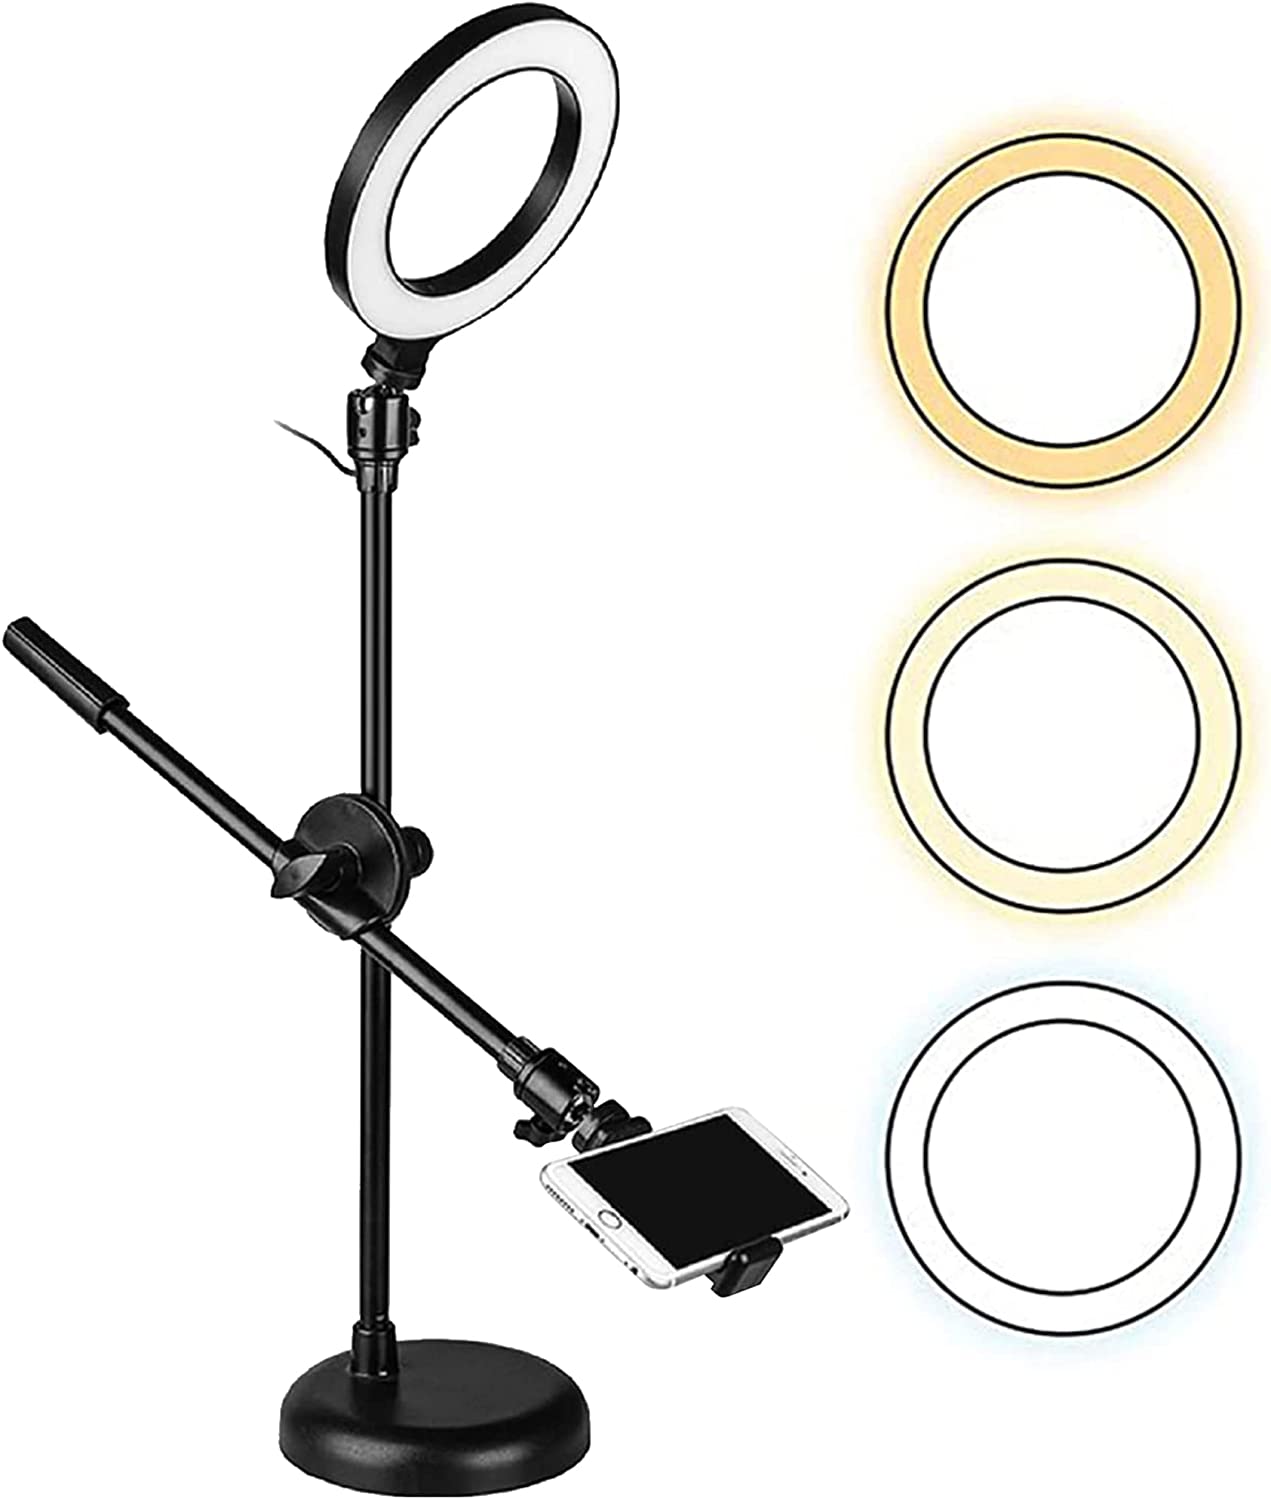 10 Selfie Ring Light With Tripod Stand Phone Holder For Live Stream Makeup  YouTube Video Photography Mini Led Camera Ringlight From Promic, $26.14 |  DHgate.Com